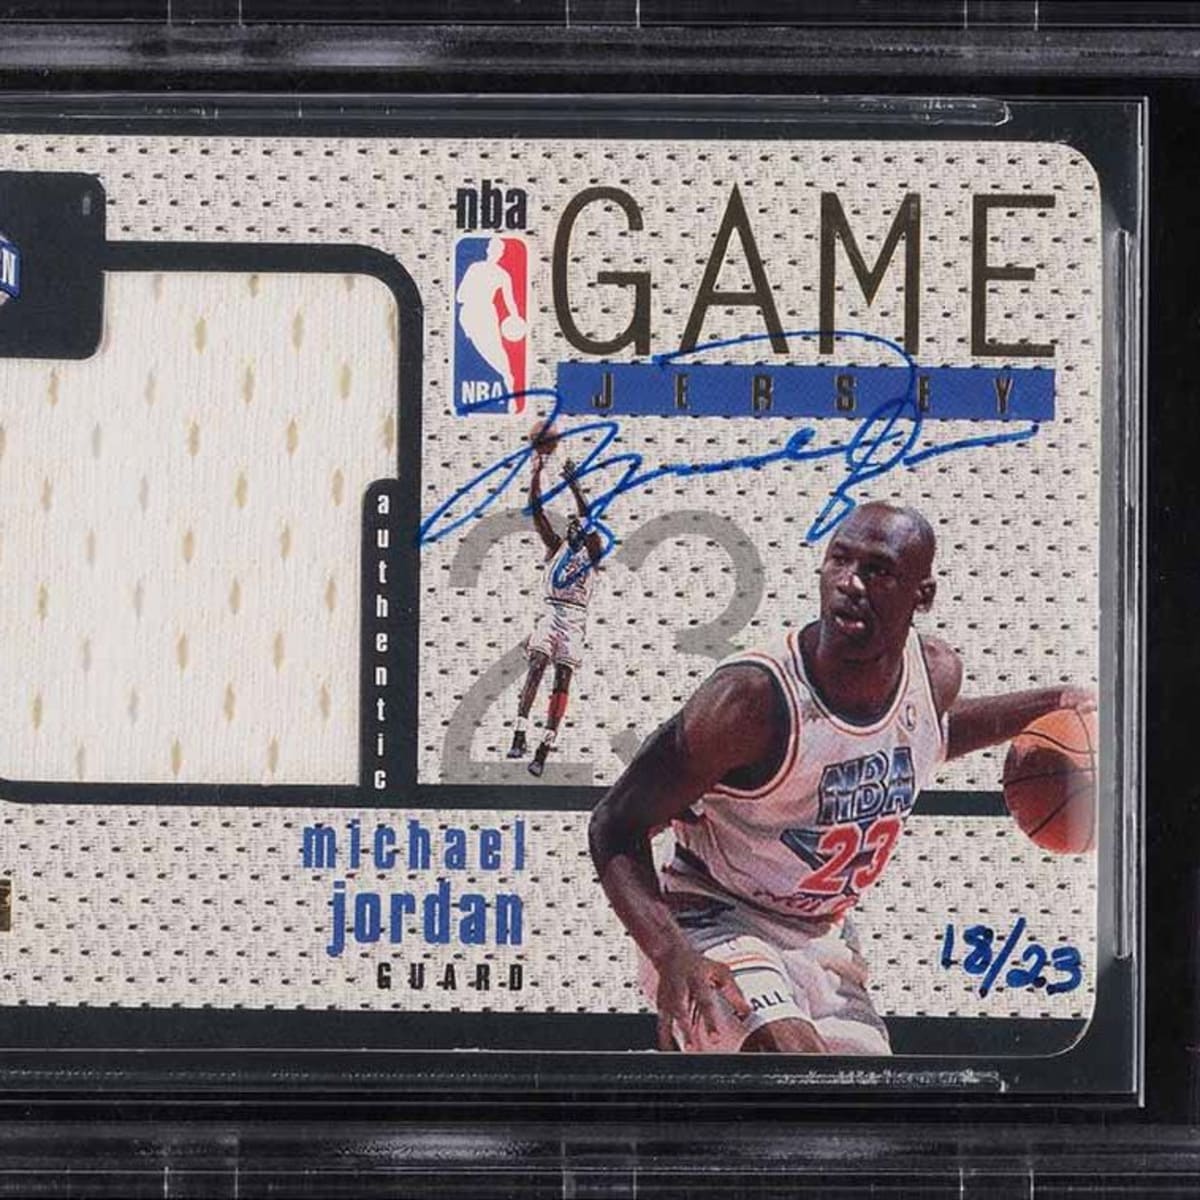 1997-98 Upper Deck Basketball Game Used Jersey Set an Insert for